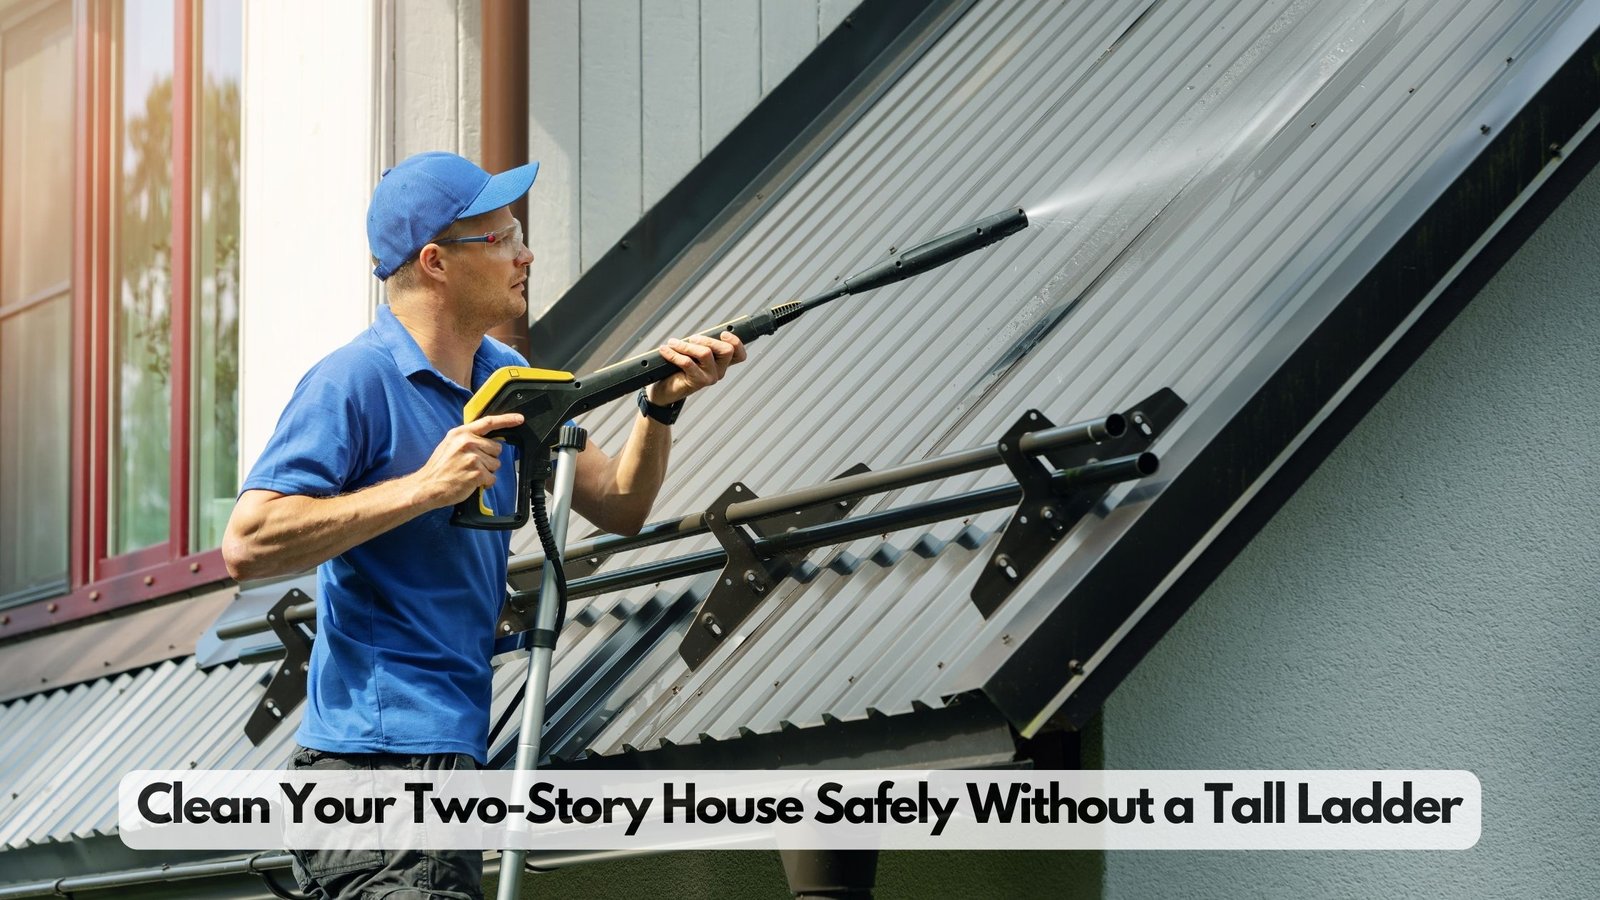 Pressure Washing a Two-Story House Without Climbing a Tall Ladder